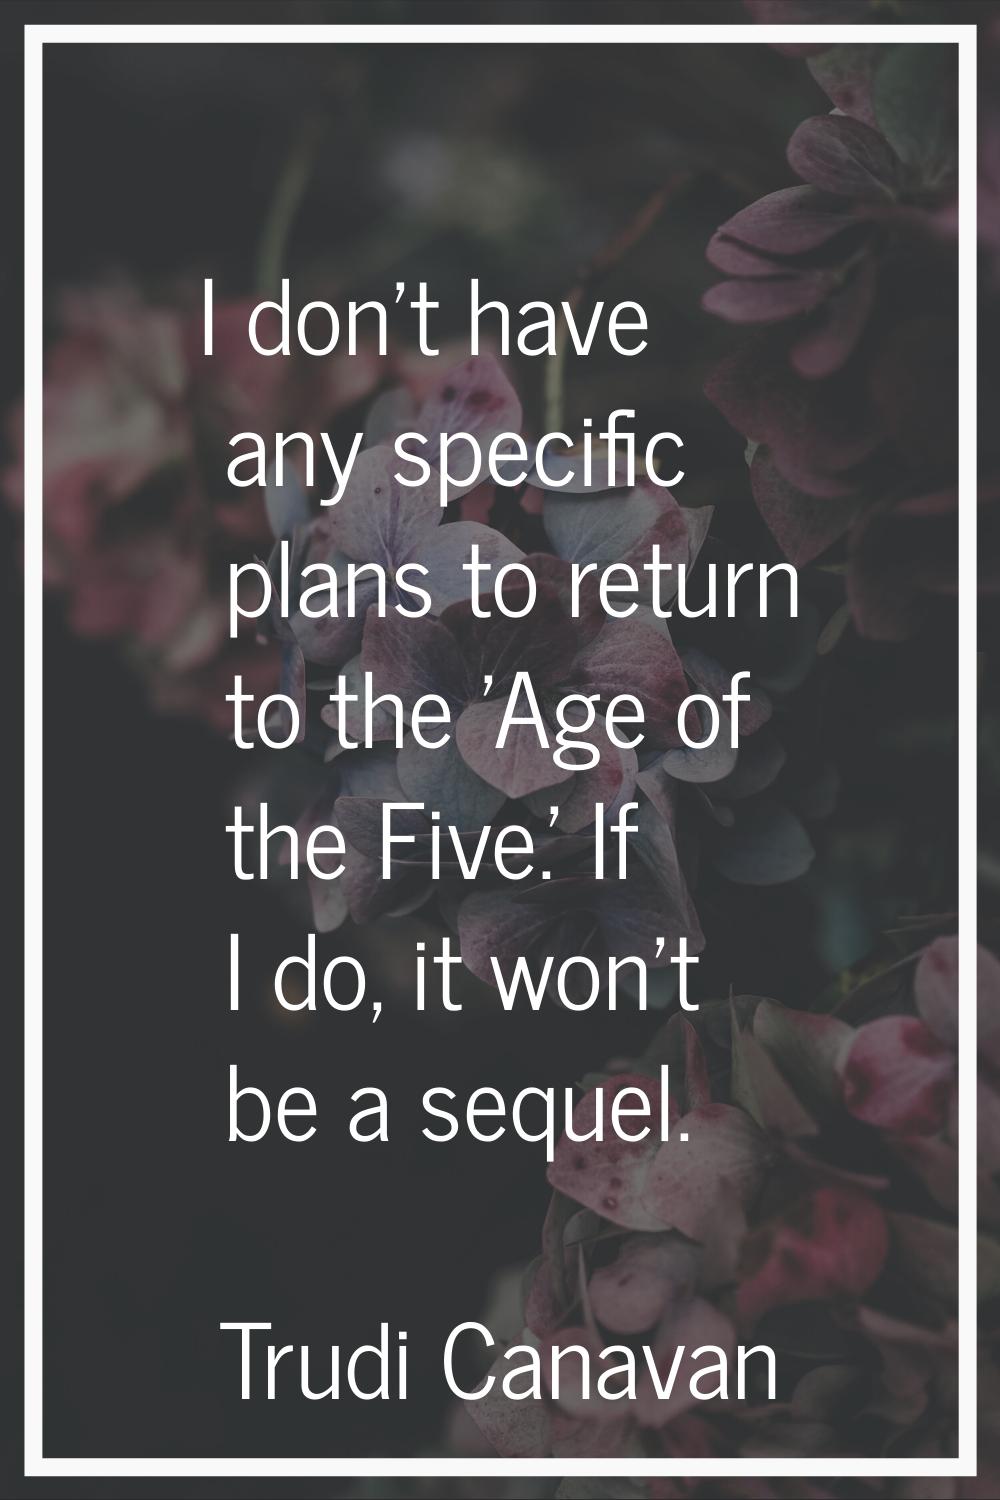 I don't have any specific plans to return to the 'Age of the Five.' If I do, it won't be a sequel.